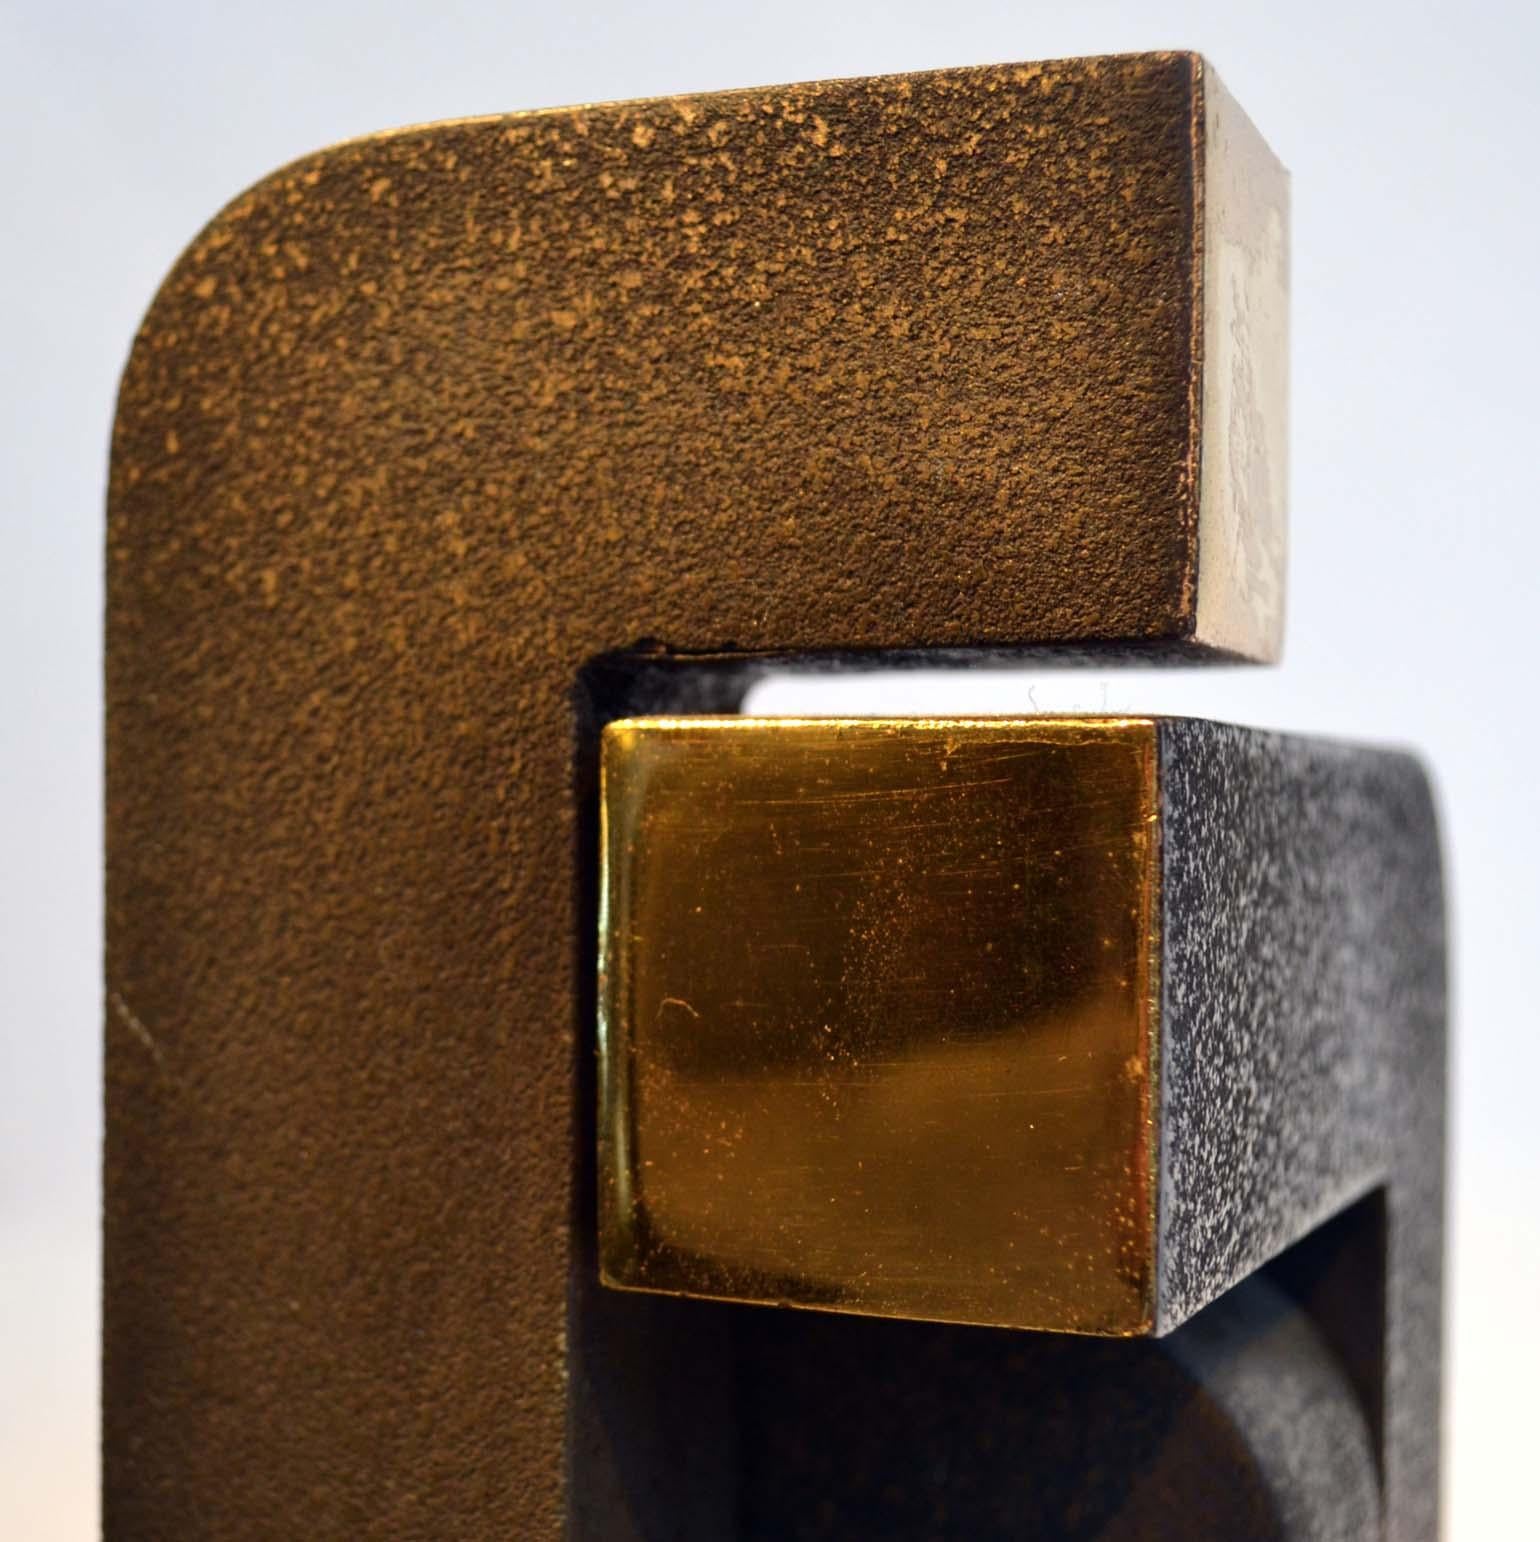 Abstract Geometric Minimalist Bronze Sculpture by Zonena 1979 in Limited Edition 4